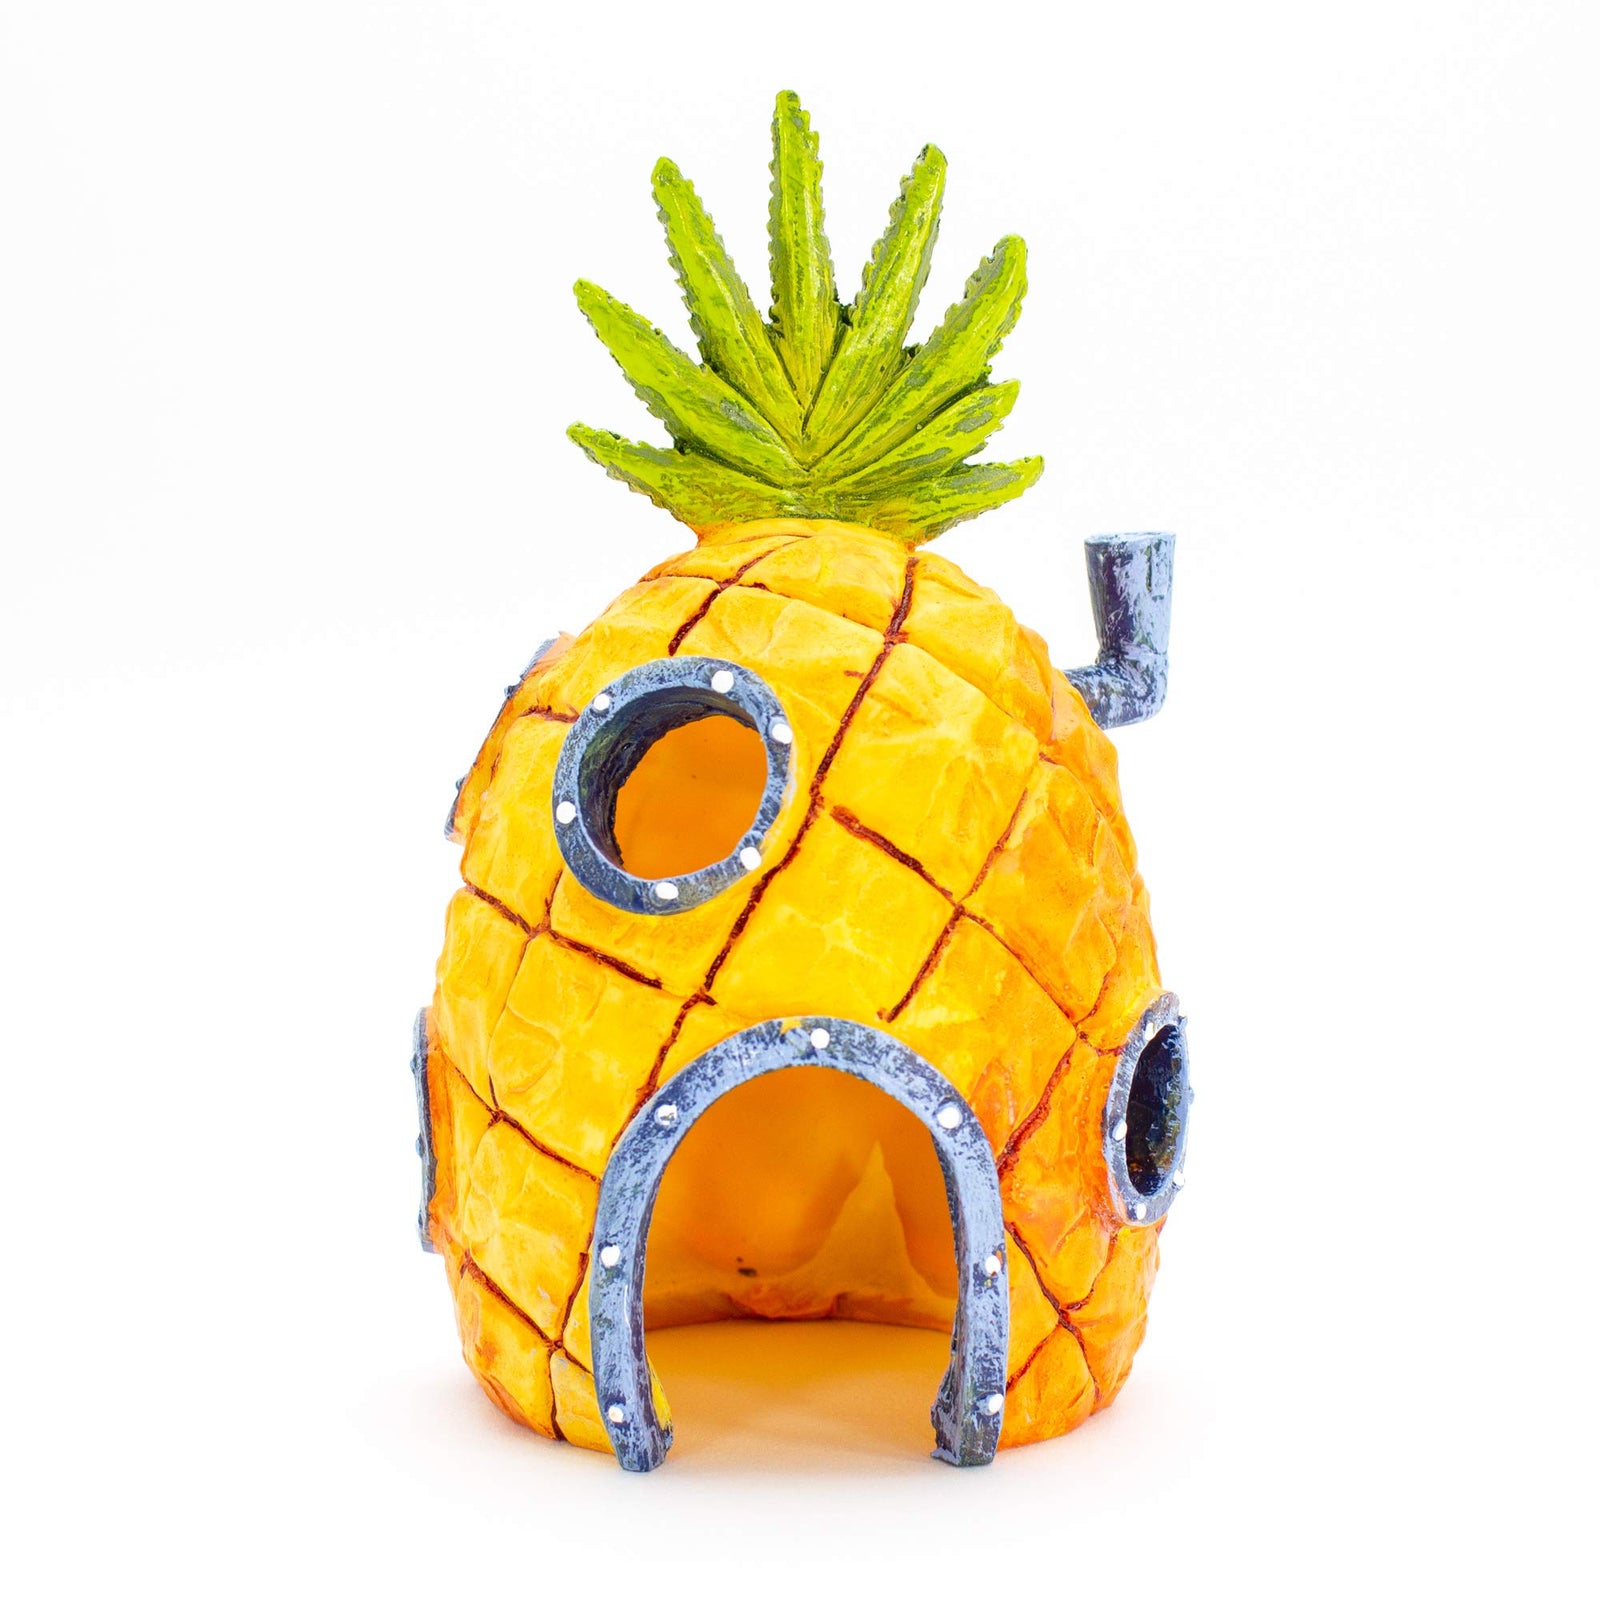 Penn-Plax Officially Licensed Nickelodeon SpongeBob Aquarium Ornament – SpongeBob’s Pineapple House - Perfect for Fish to Swim In and Around - Full Color 6" Decoration